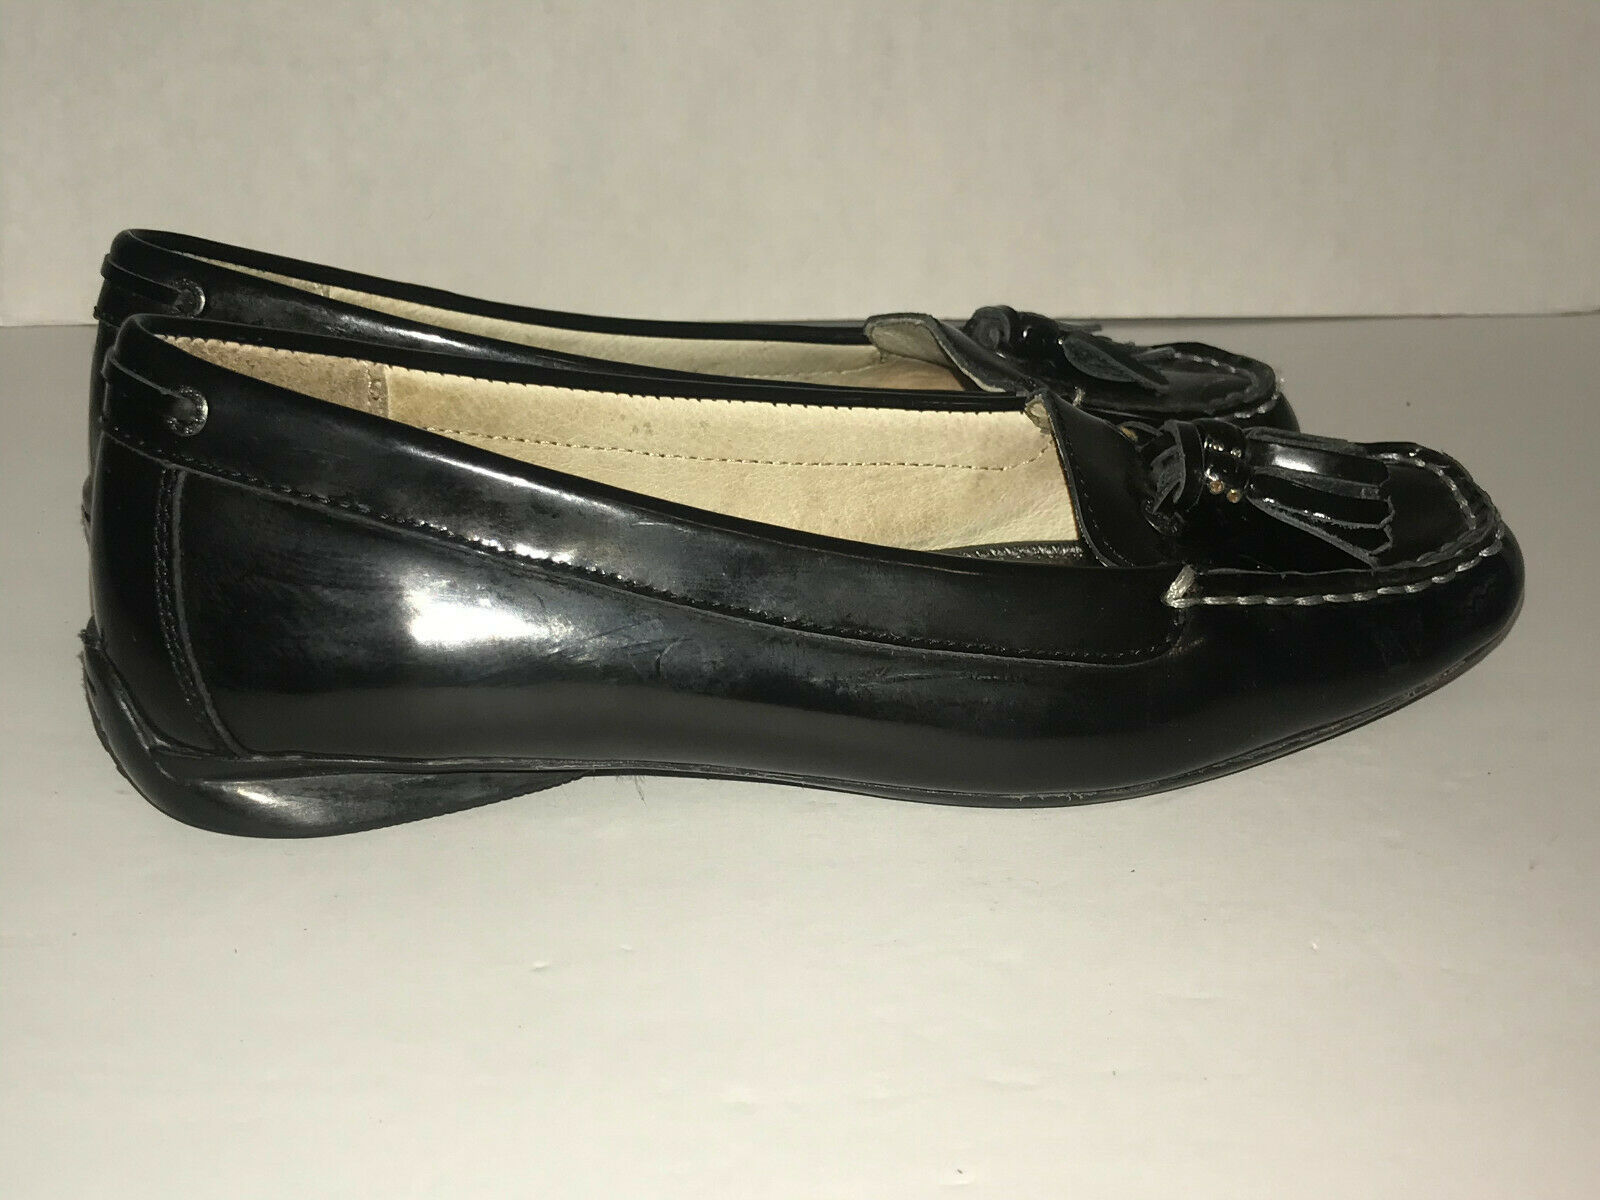 Sperry Top Sider Black Patent Leather Womens Size 7.5M Loafer Style ...